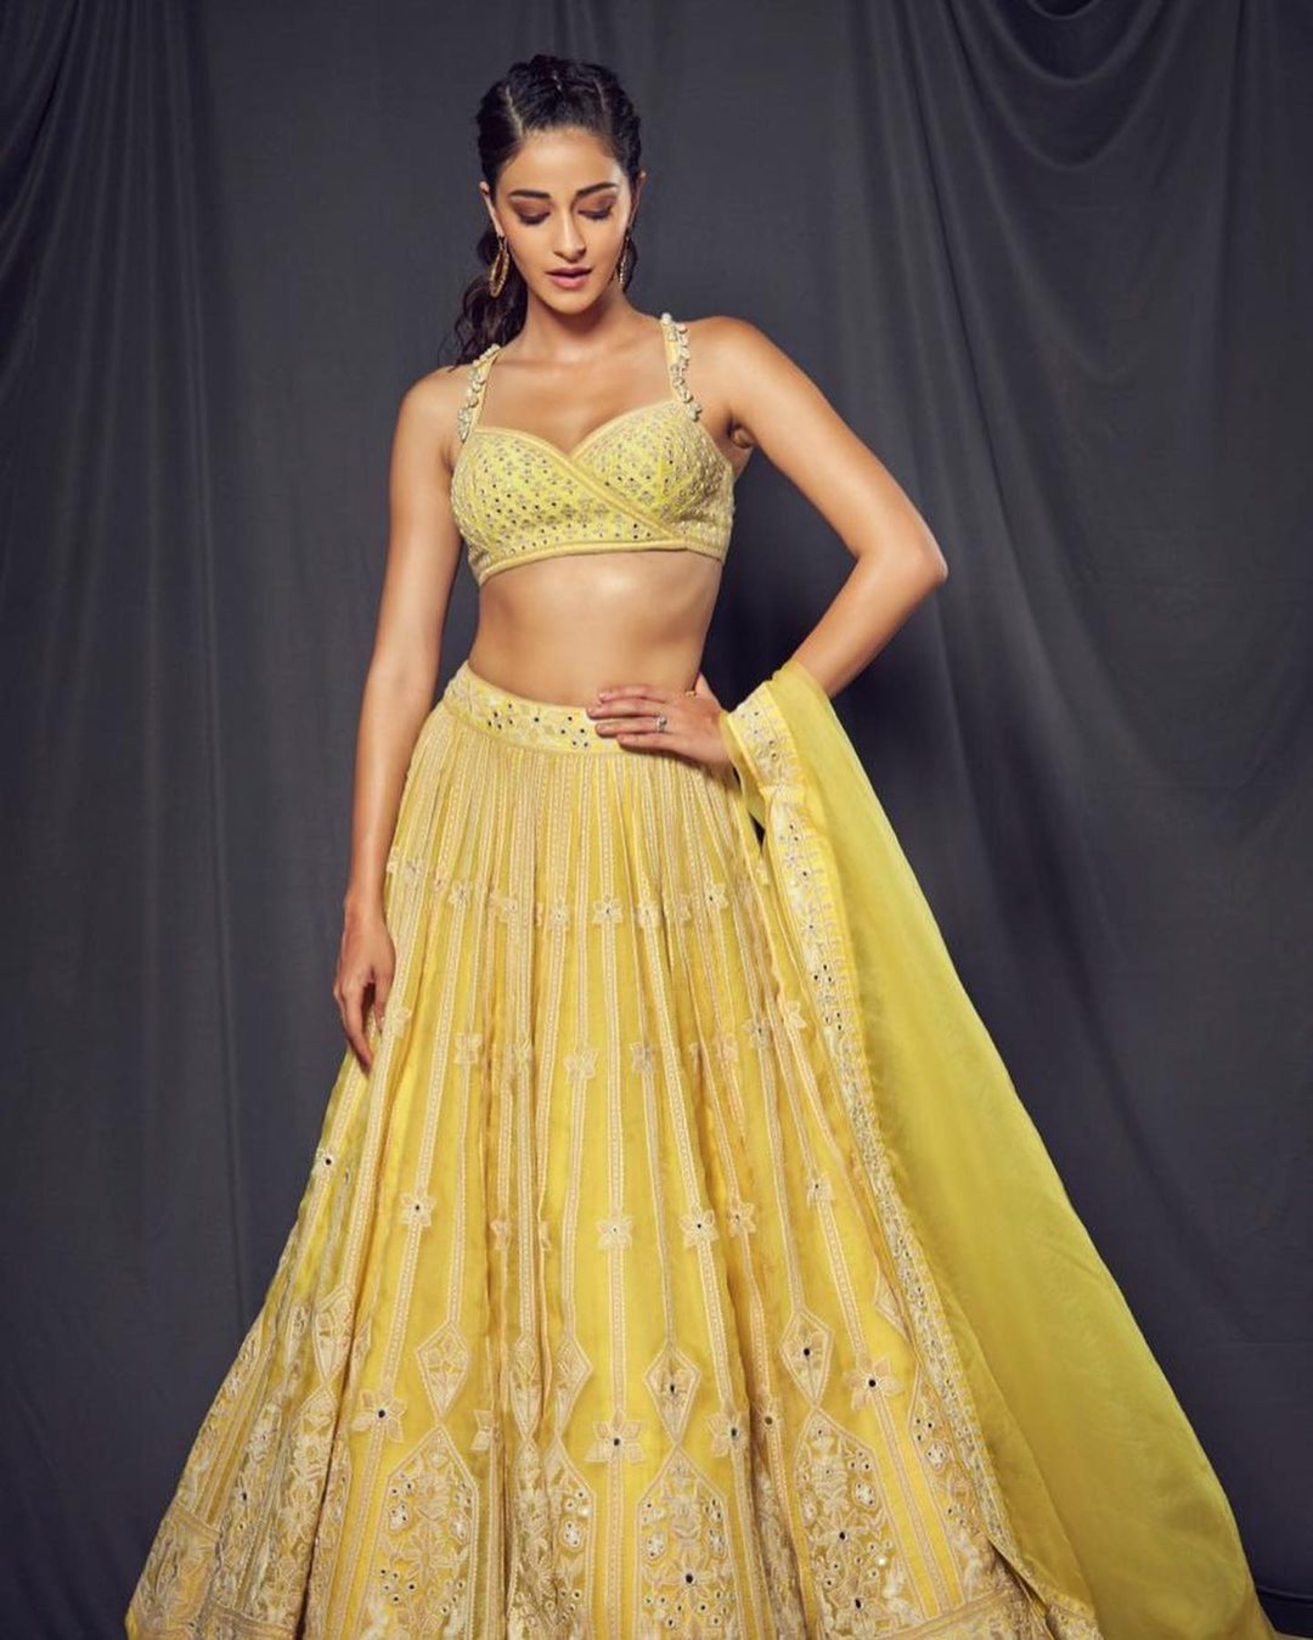 Ananya Pandey Stuns In Both Lehenga And Bikini Which One Does She Look Sexier In Photogallery 